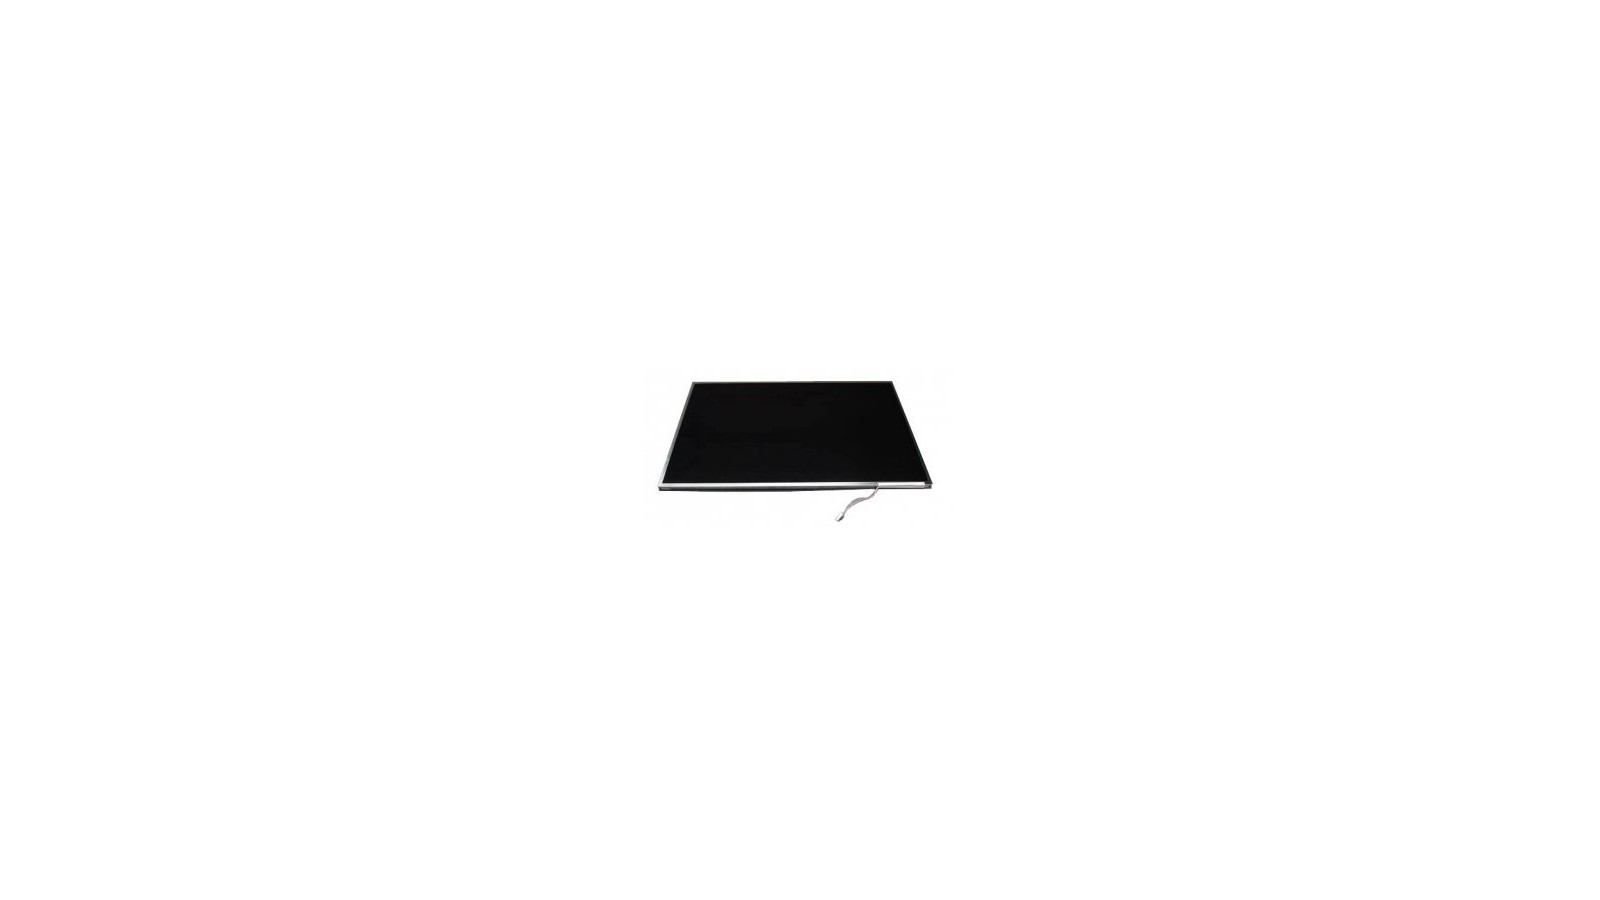 Monitor display schermo lcd 15.4" Acer Aspire 5630-6368